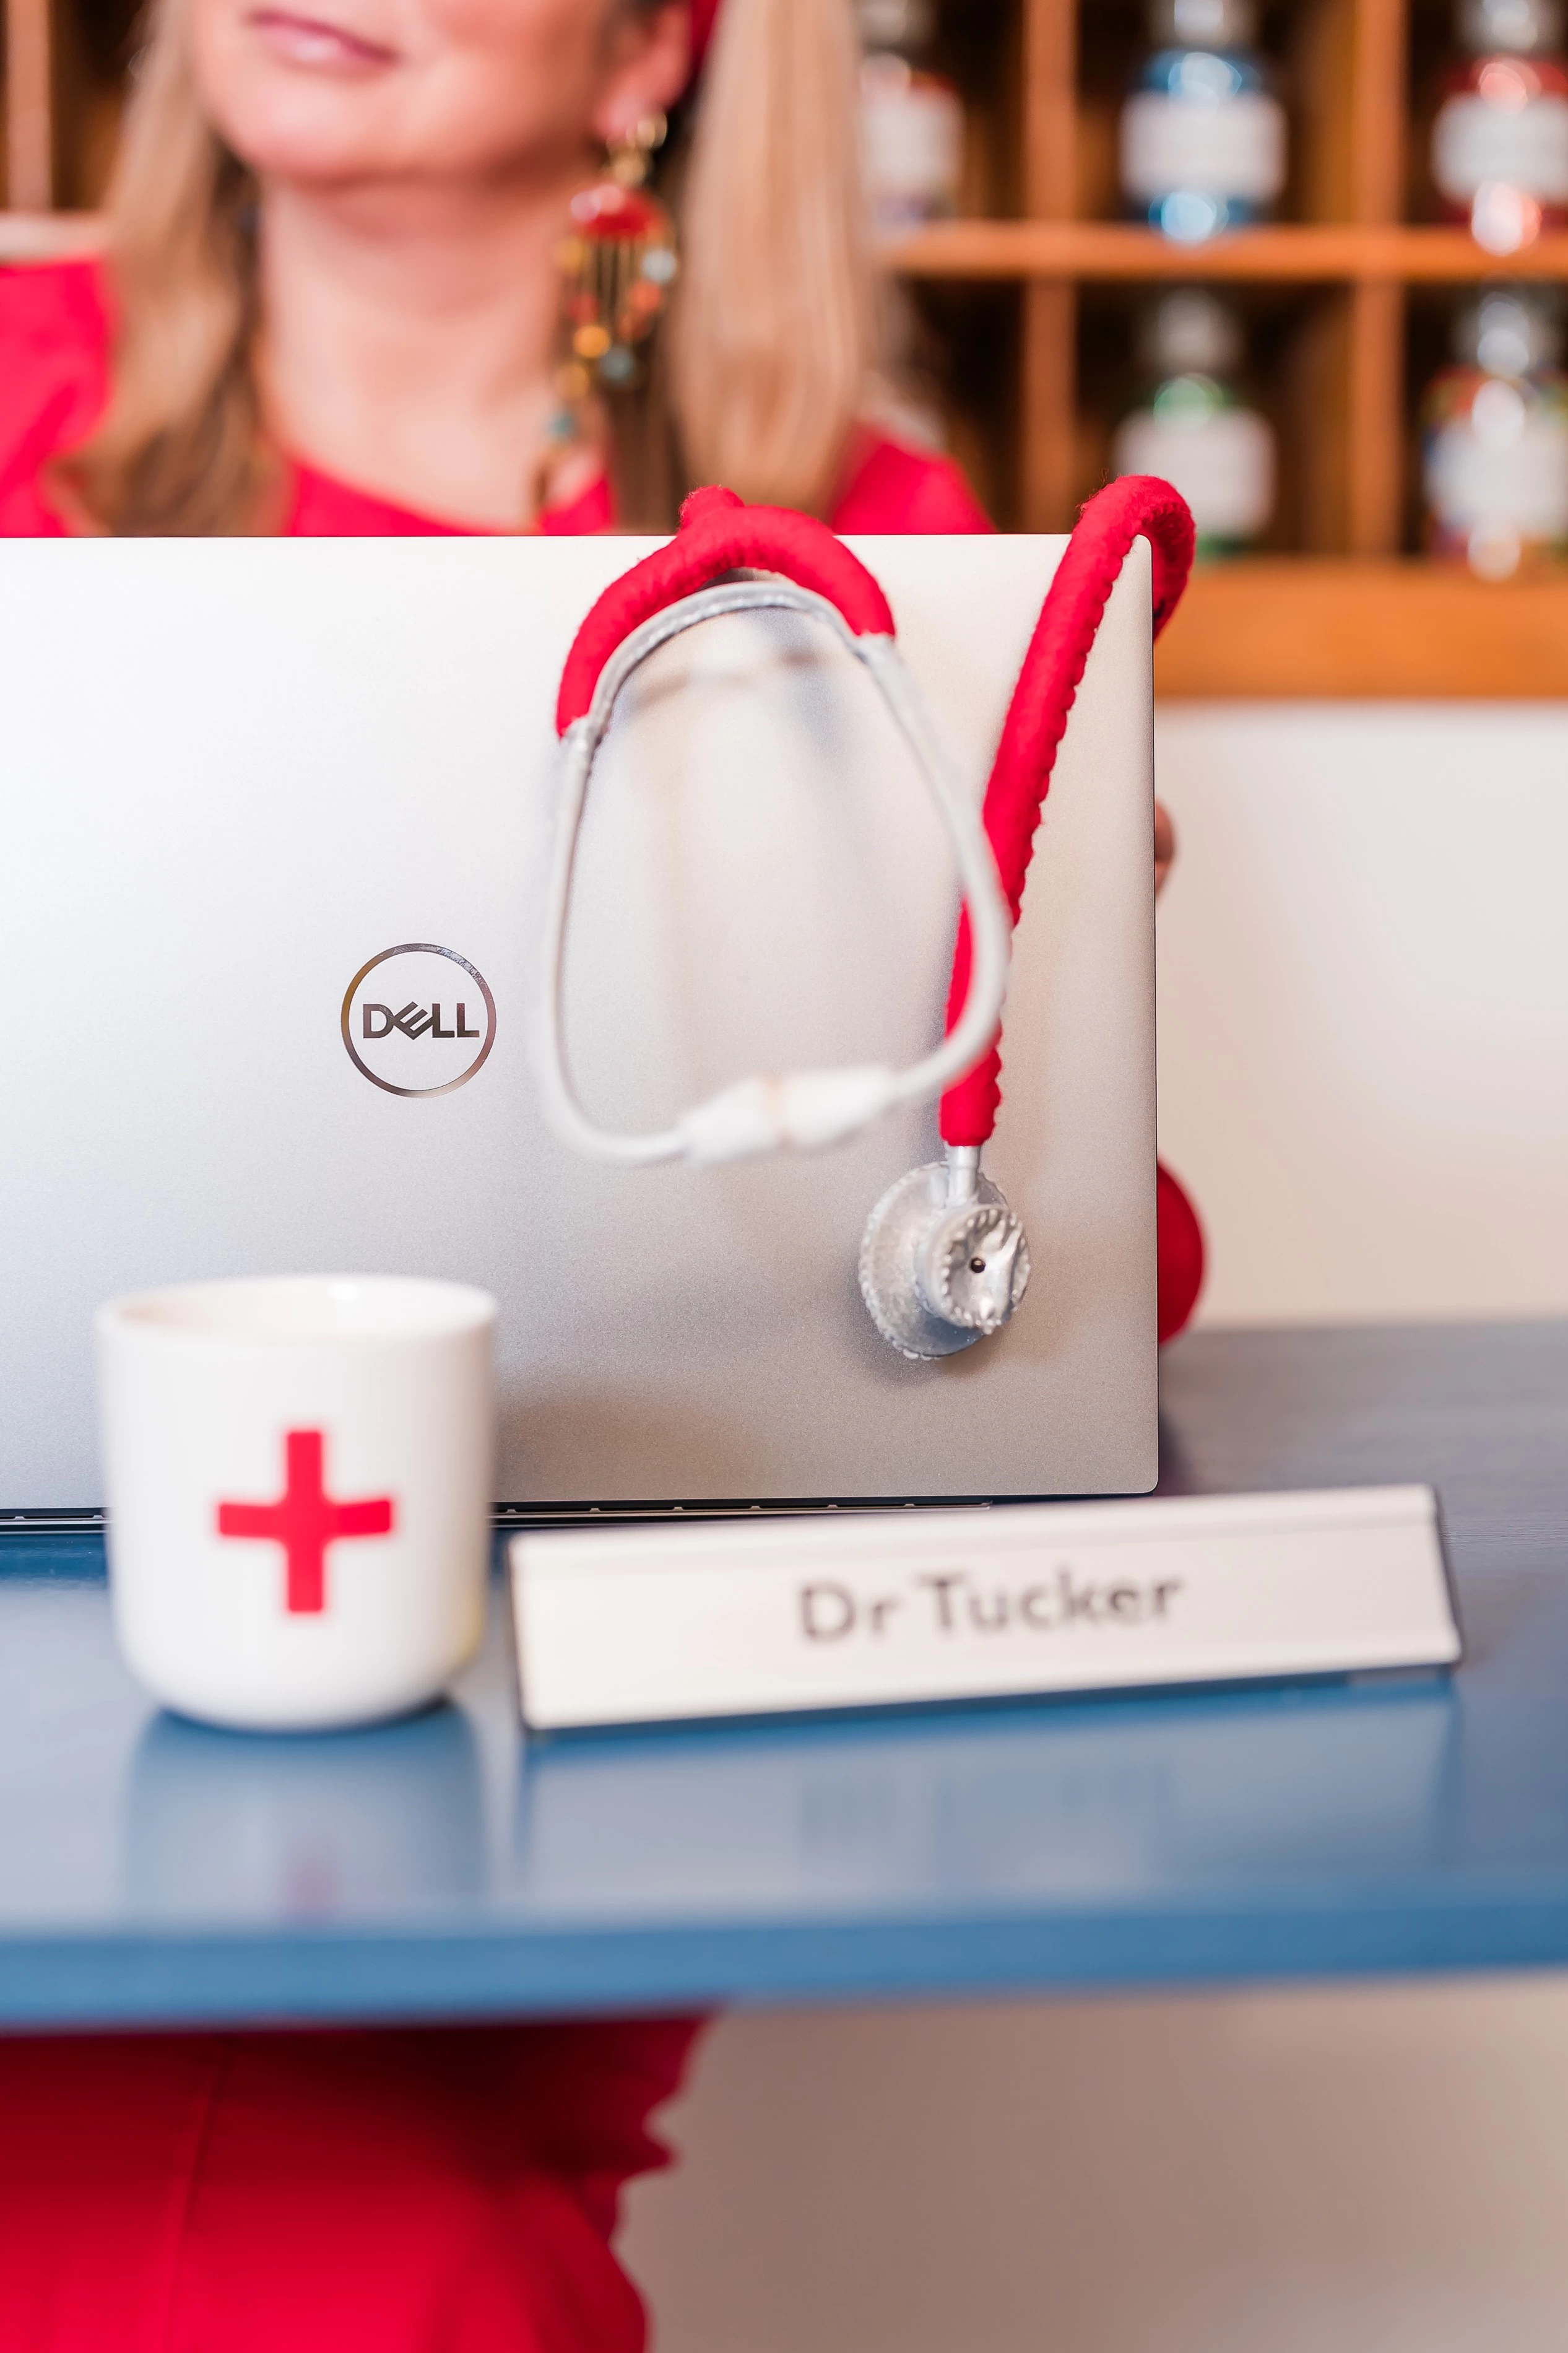 Dr Tucker with a Dell computer